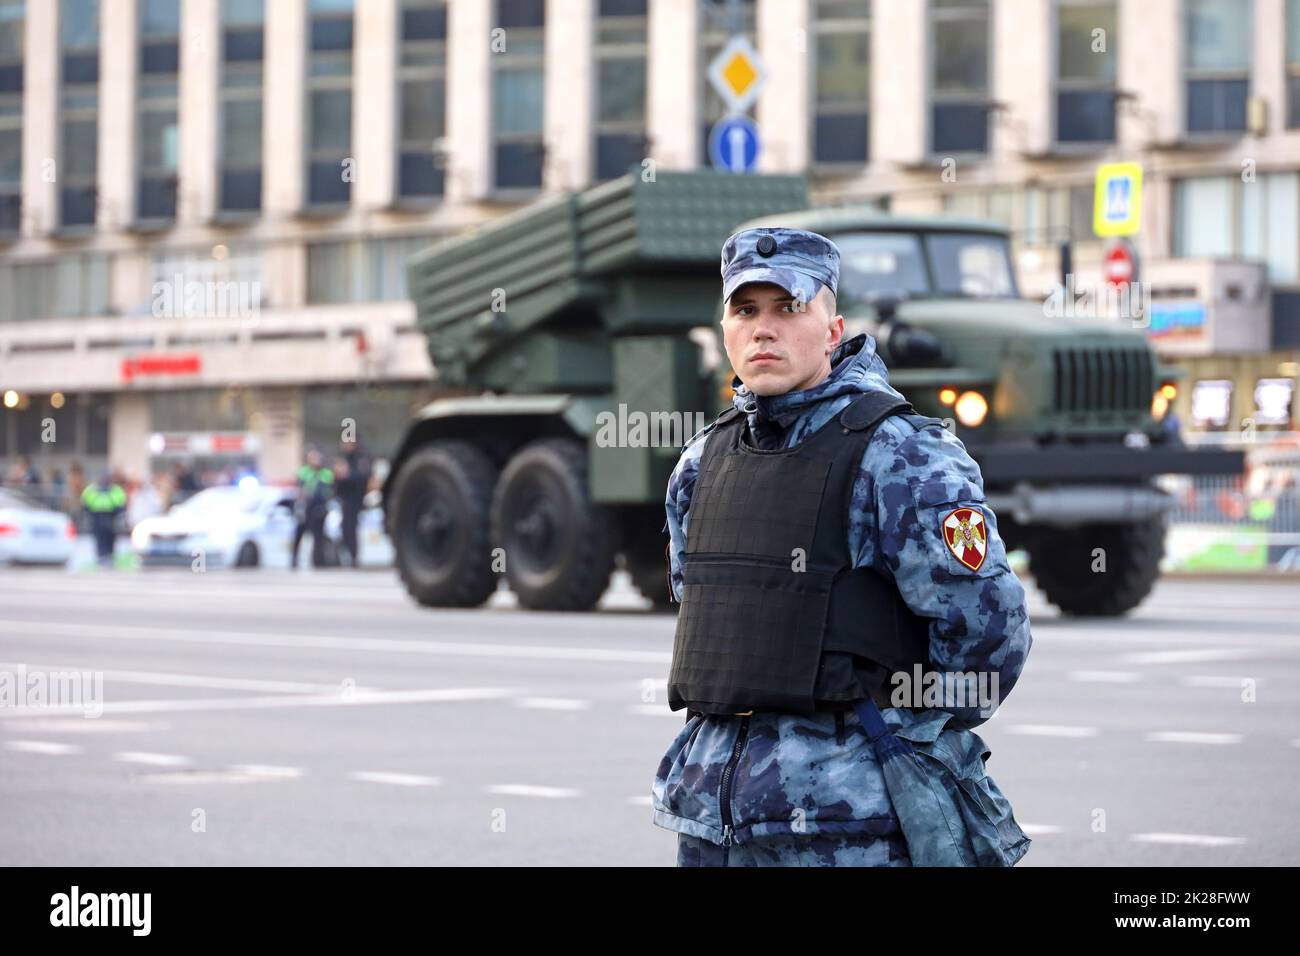 Russian soldier standing in front of multiple launch rocket system 'Tornado' on city street Stock Photo